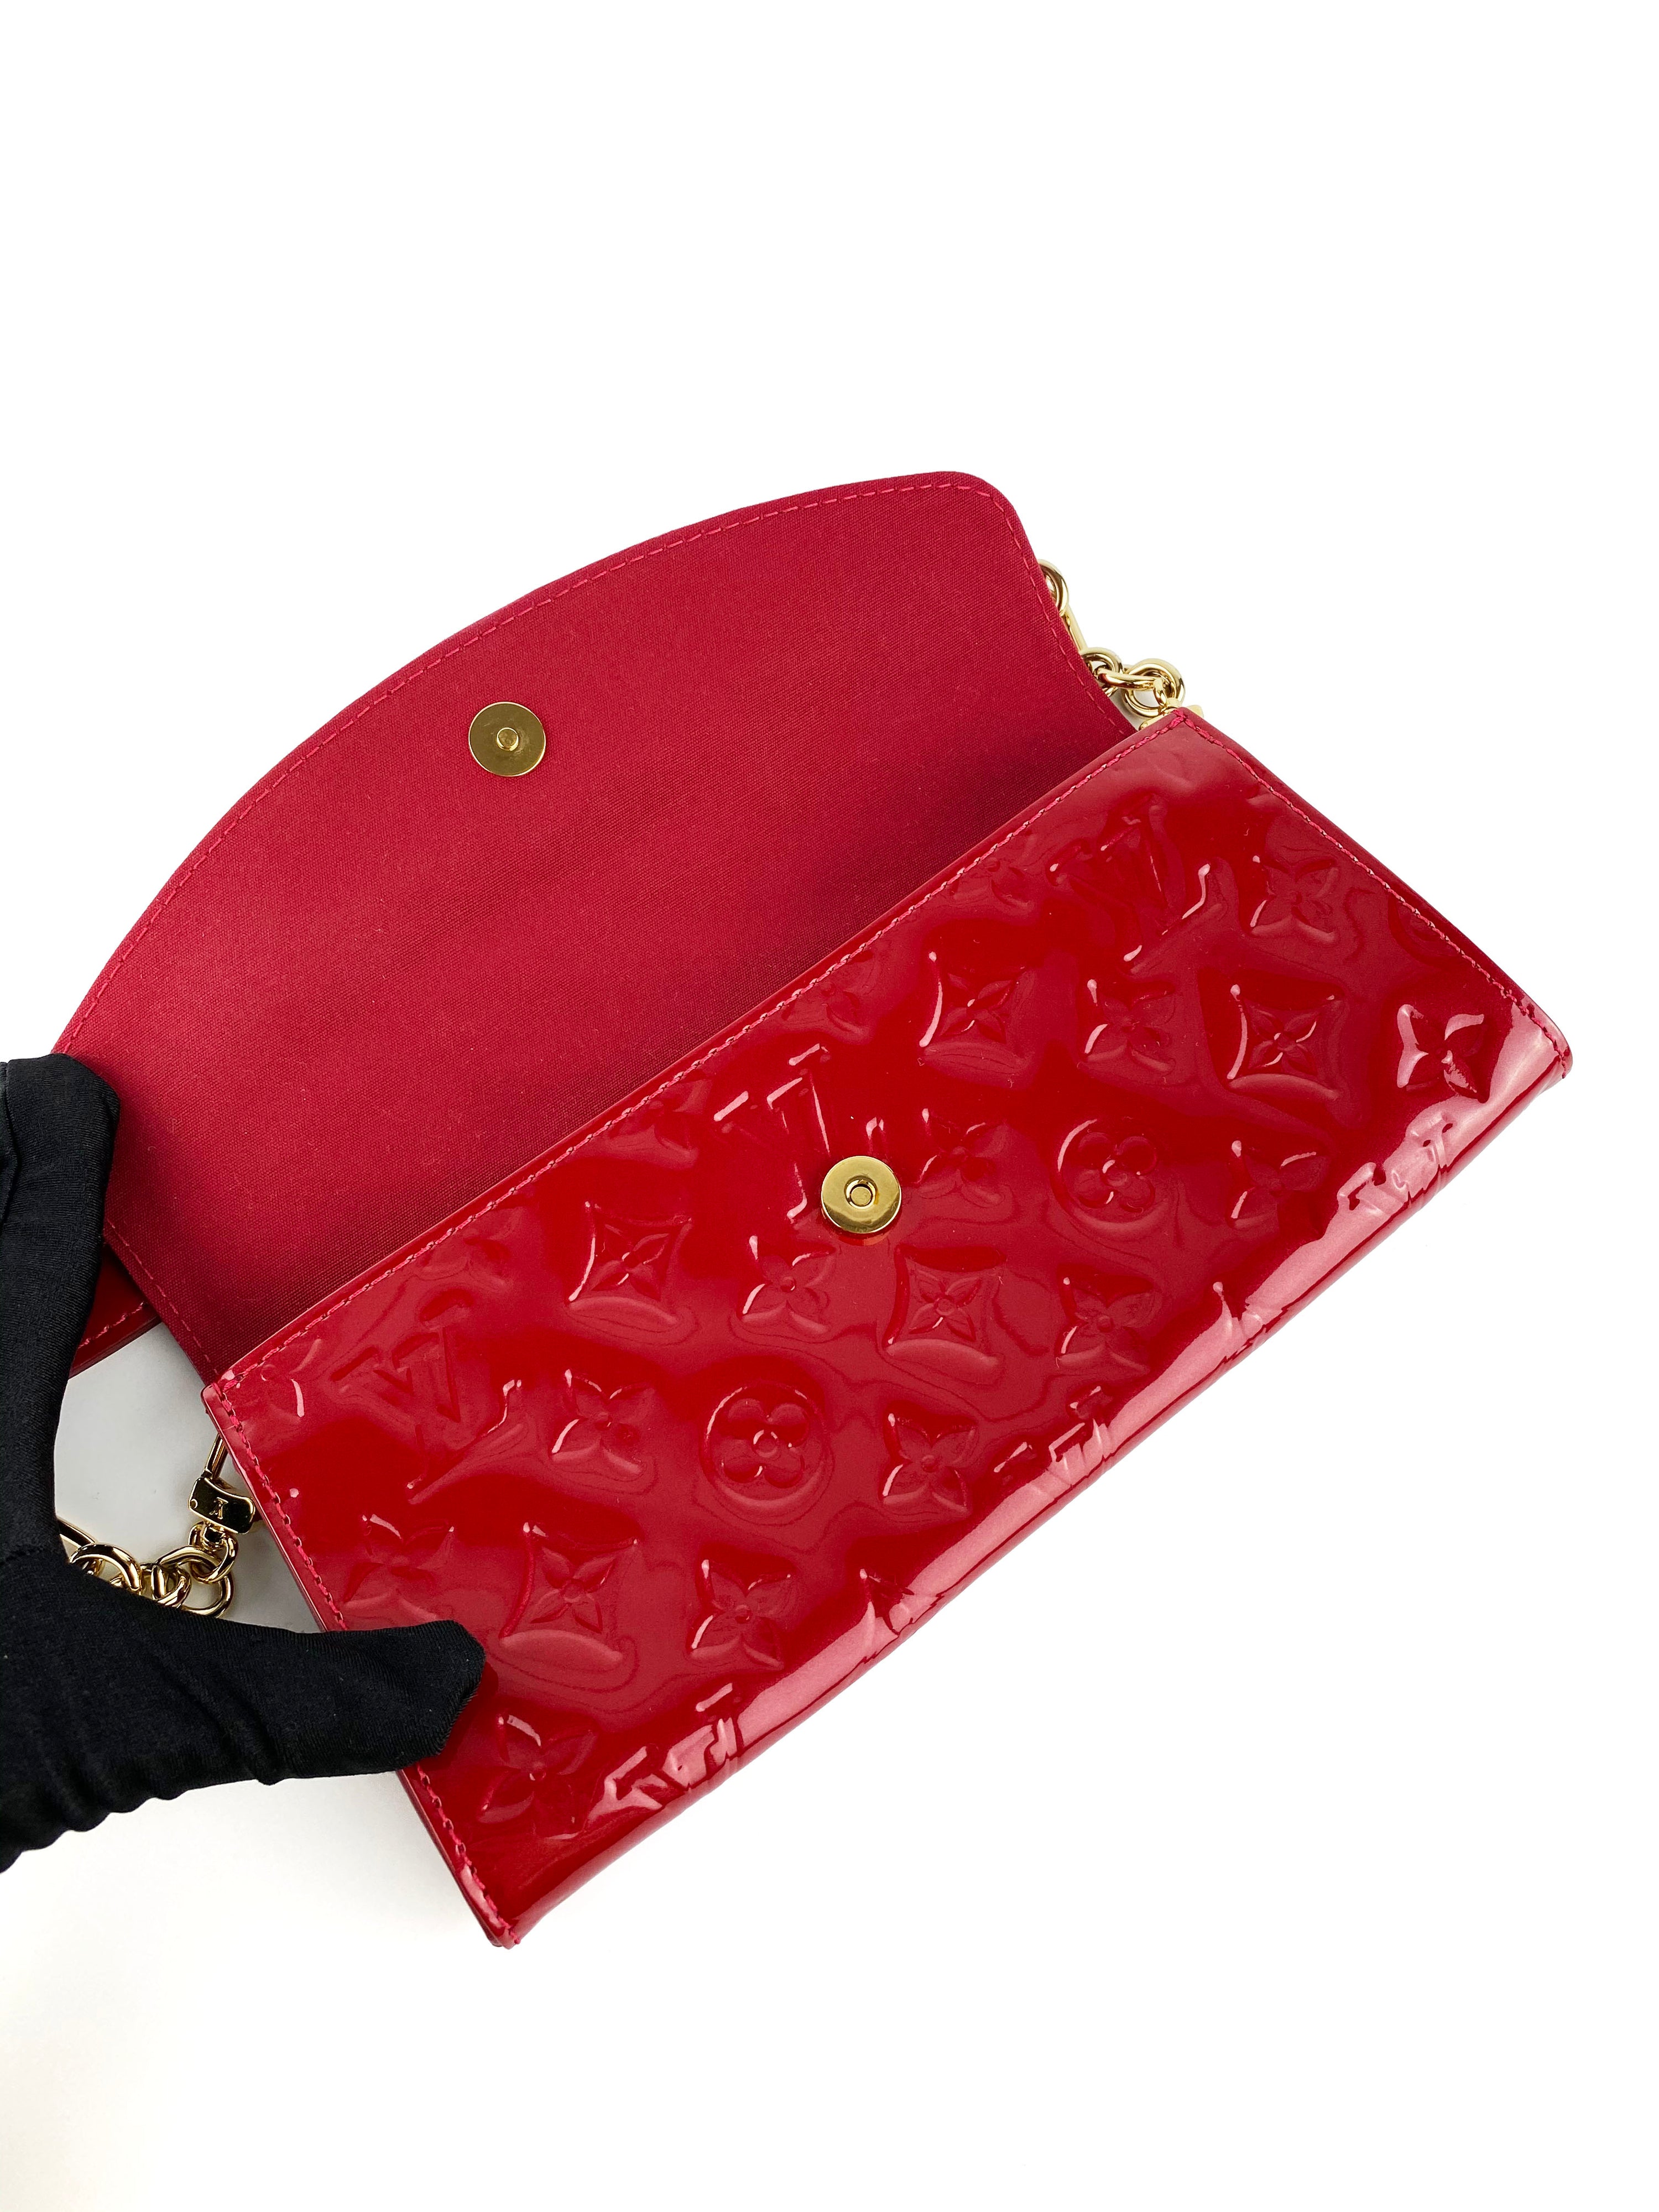 Louis Vuitton Red Vernis Leather Sunset Blvd Bag